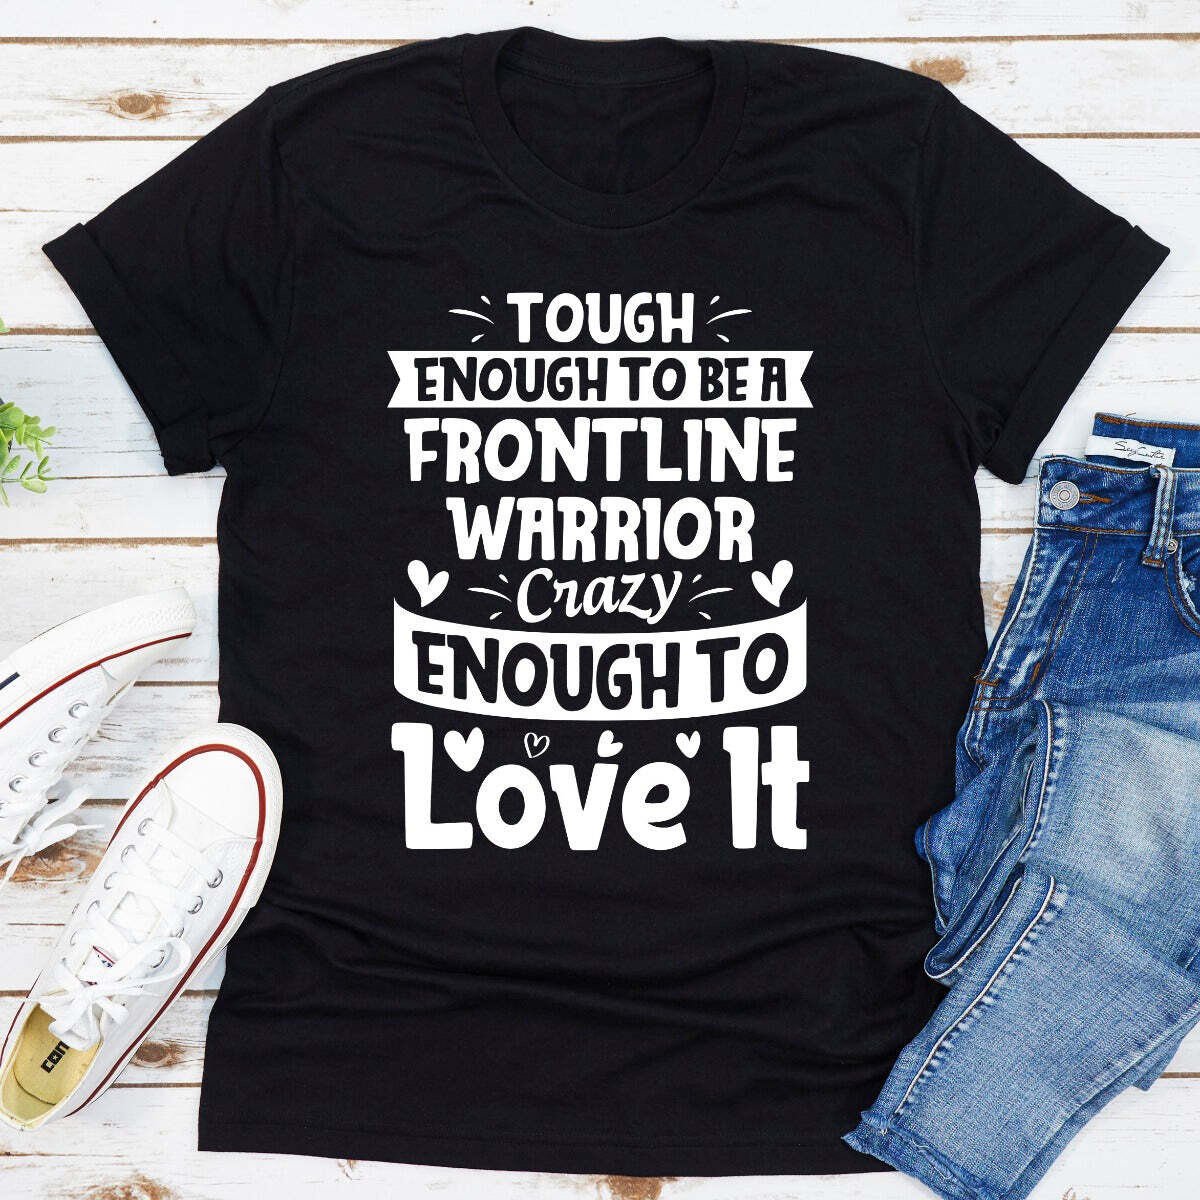 Tough Enough To Be A Frontline Warrior Crazy Enough To Love It T-Shirt